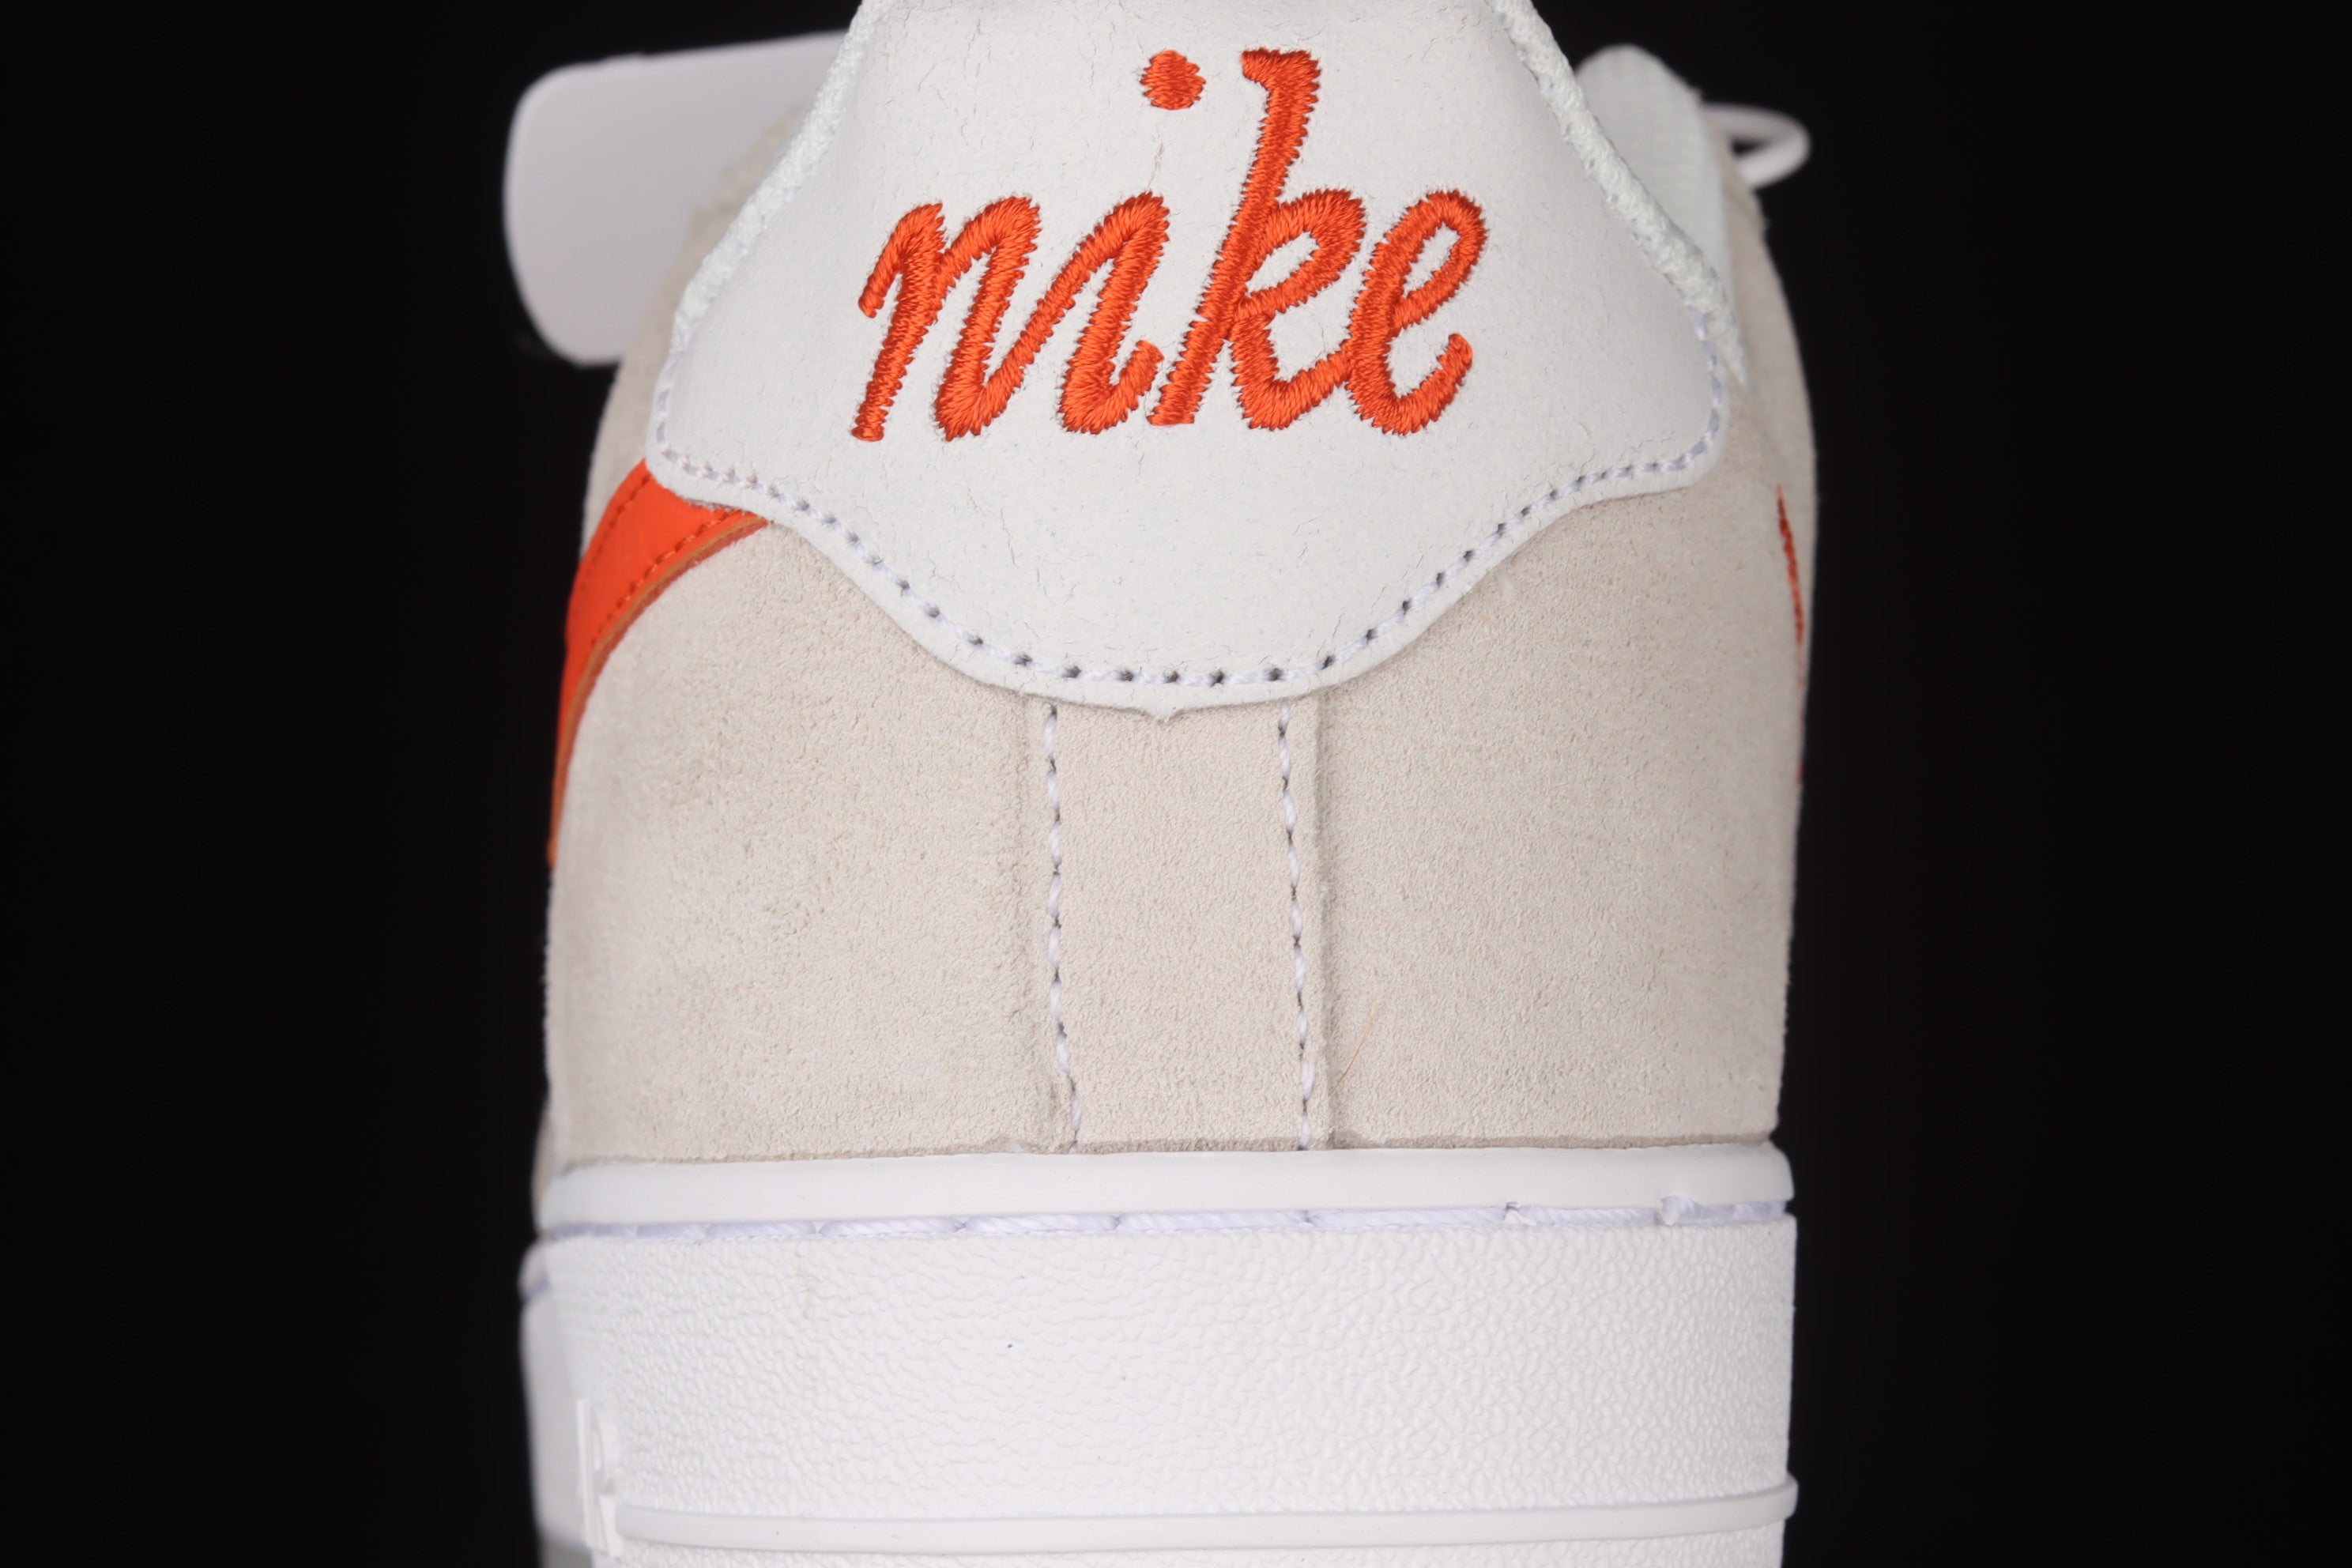 NikeWMNS Air Force 1 AF1 Low First Use - Cream